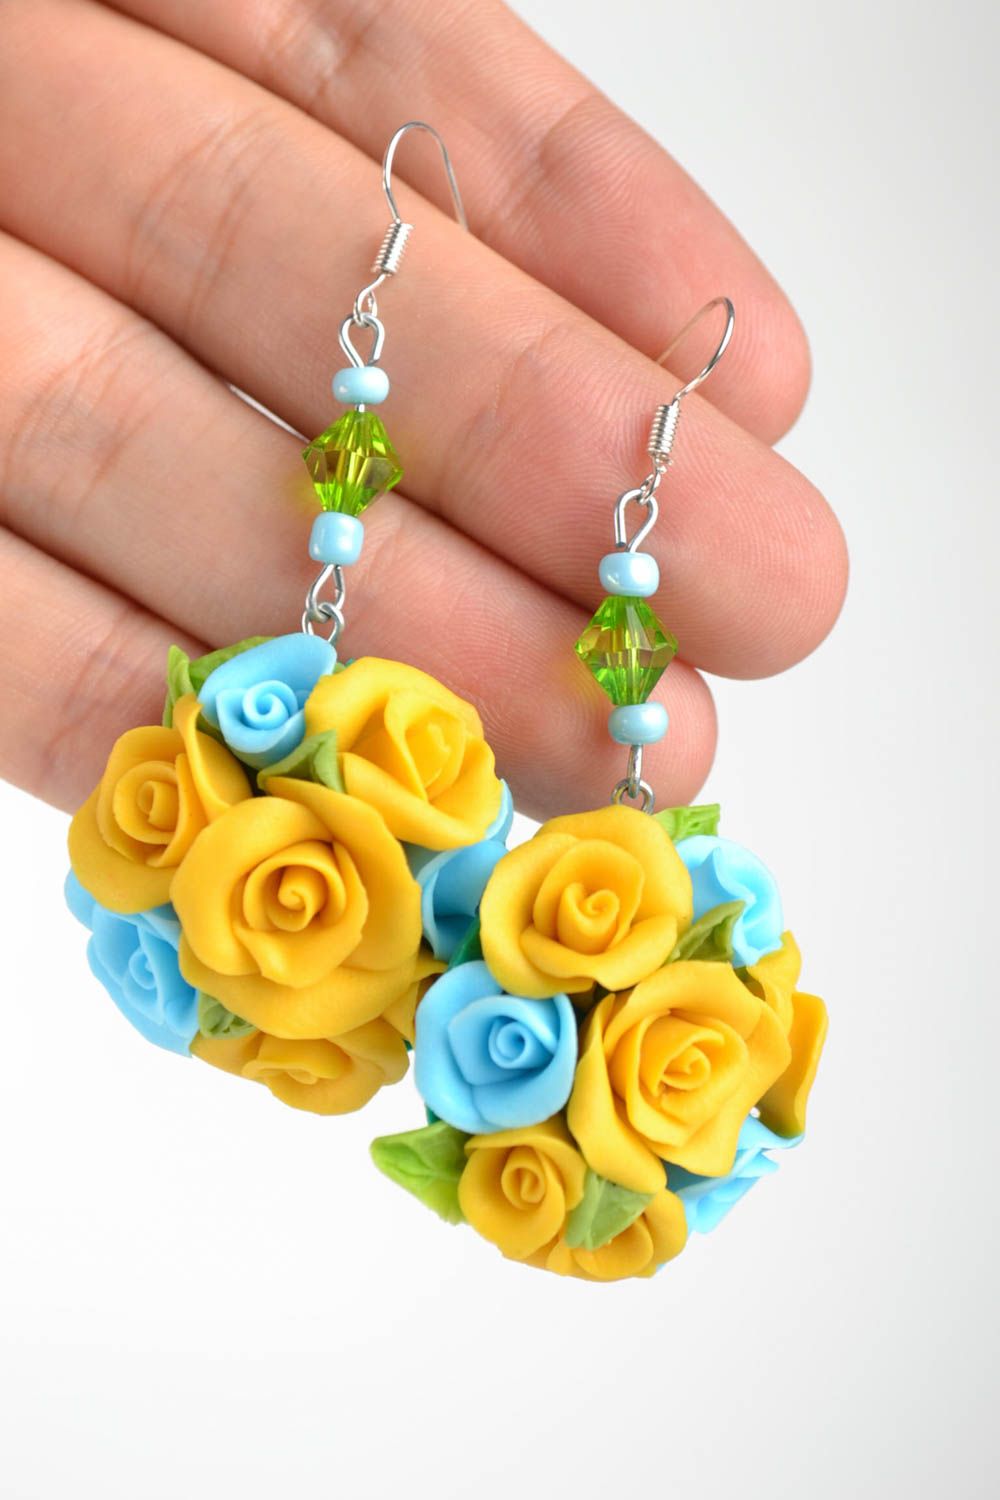 Flower jewelry handmade earrings fashion accessories birthday gifts for girls photo 5